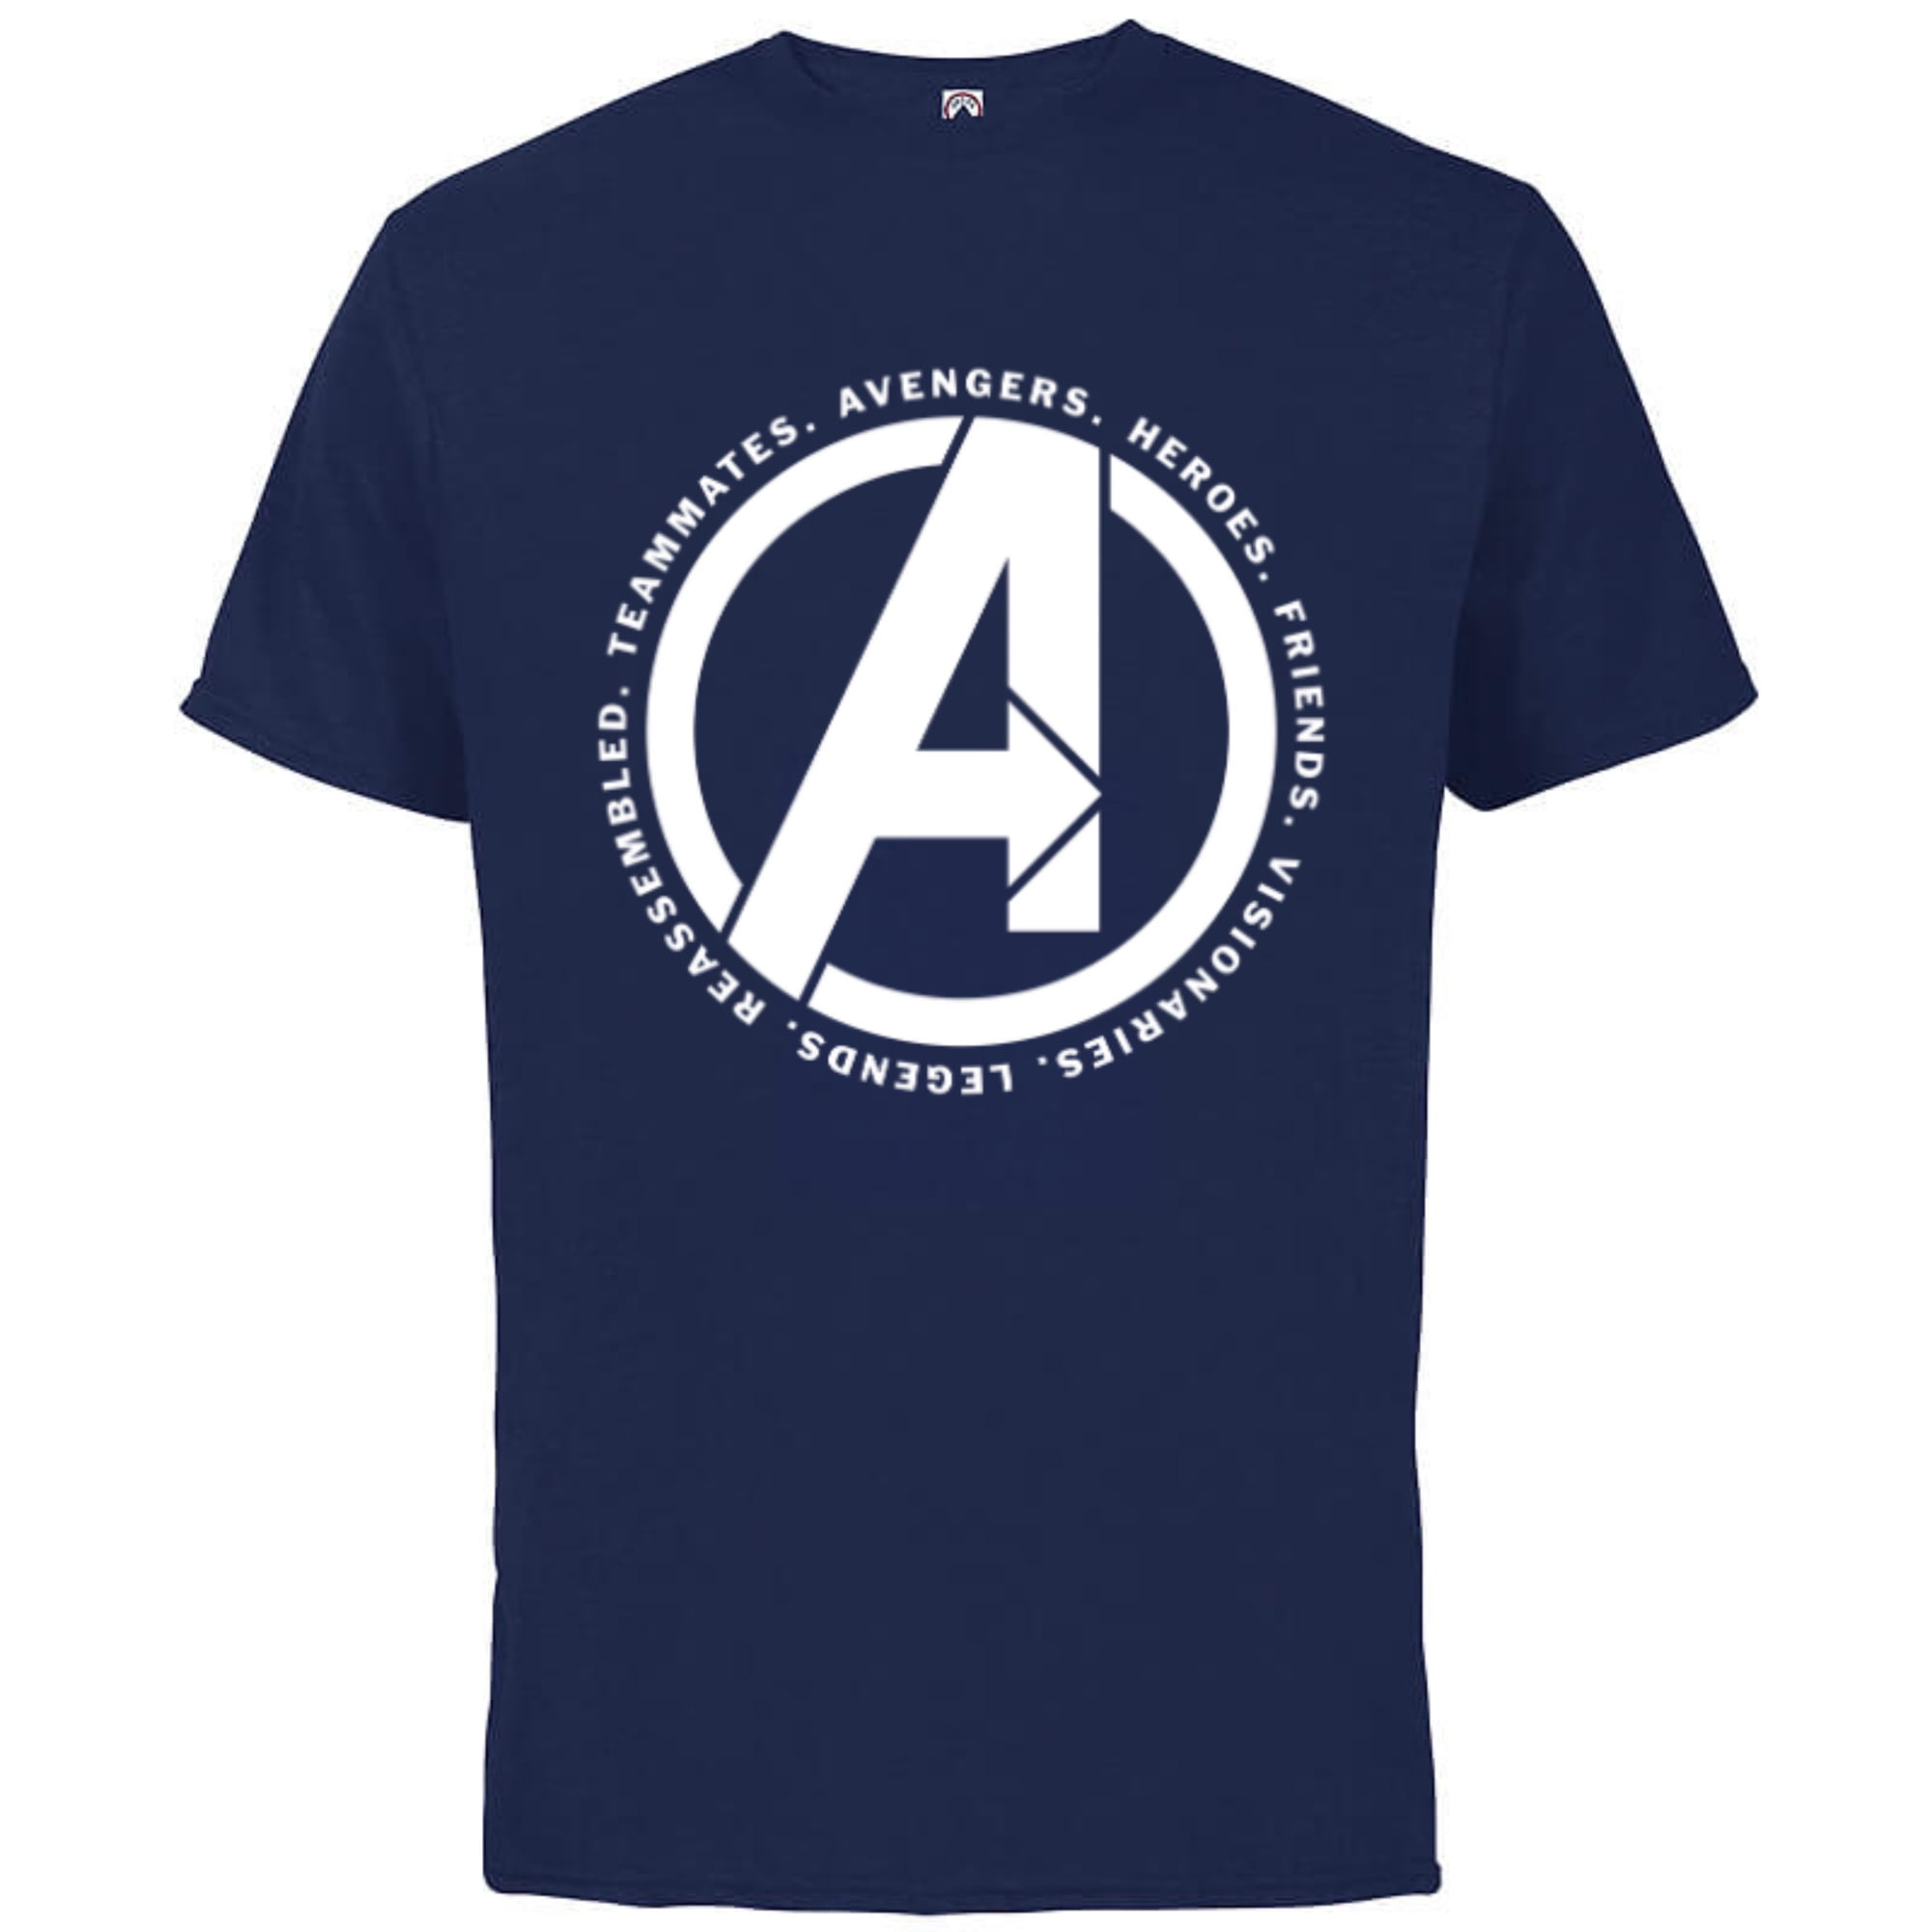 T- Short for Customized-Black Sleeve and Avengers: - Cotton Legends Endgame Shirt Adults Logo Heroes - Marvel